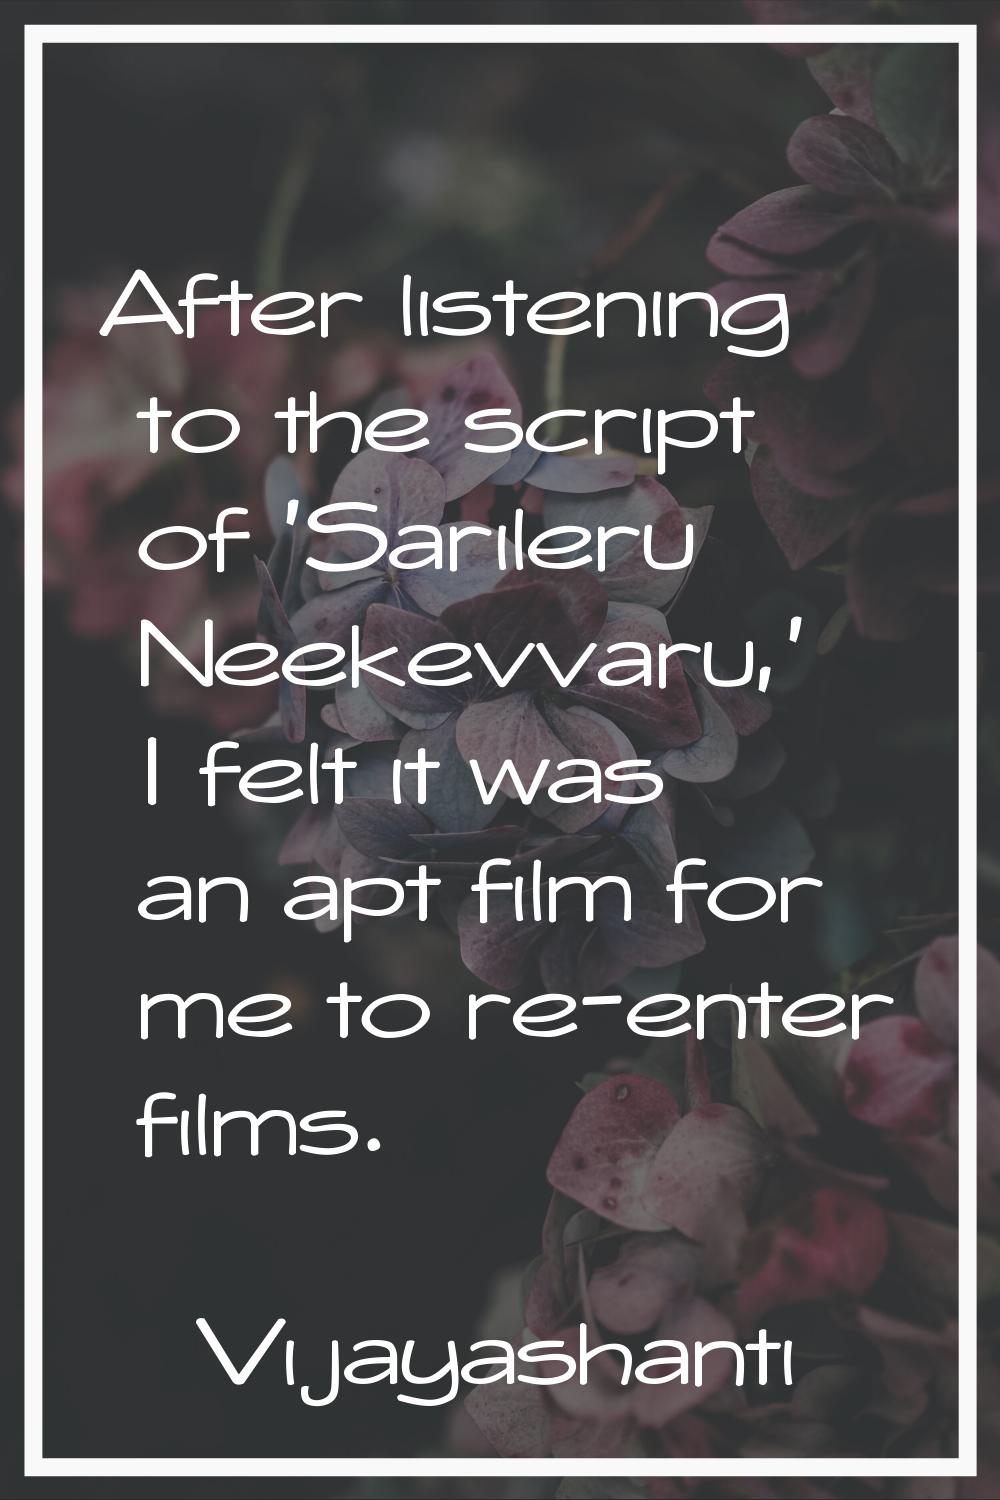 After listening to the script of 'Sarileru Neekevvaru,' I felt it was an apt film for me to re-ente